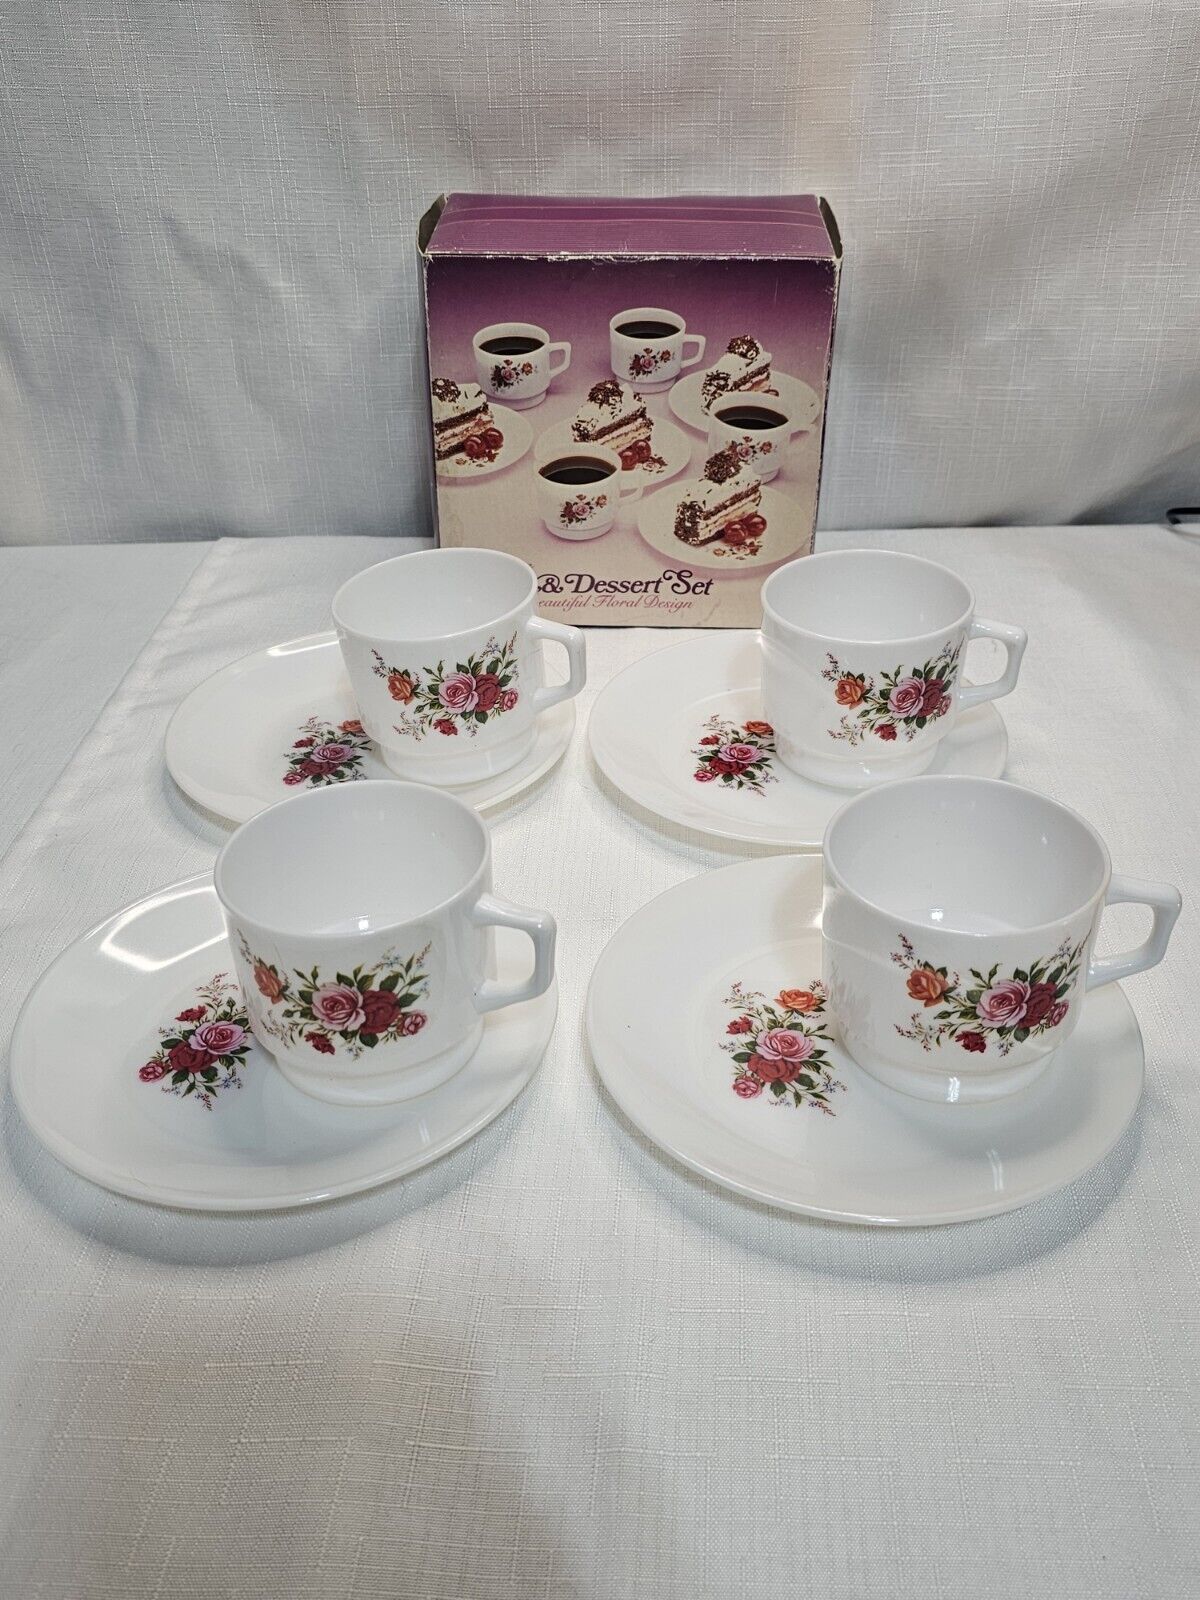 Coffee and Dessert Set 4 Cups 4 plates Plastic Tea Party Vintage Roses